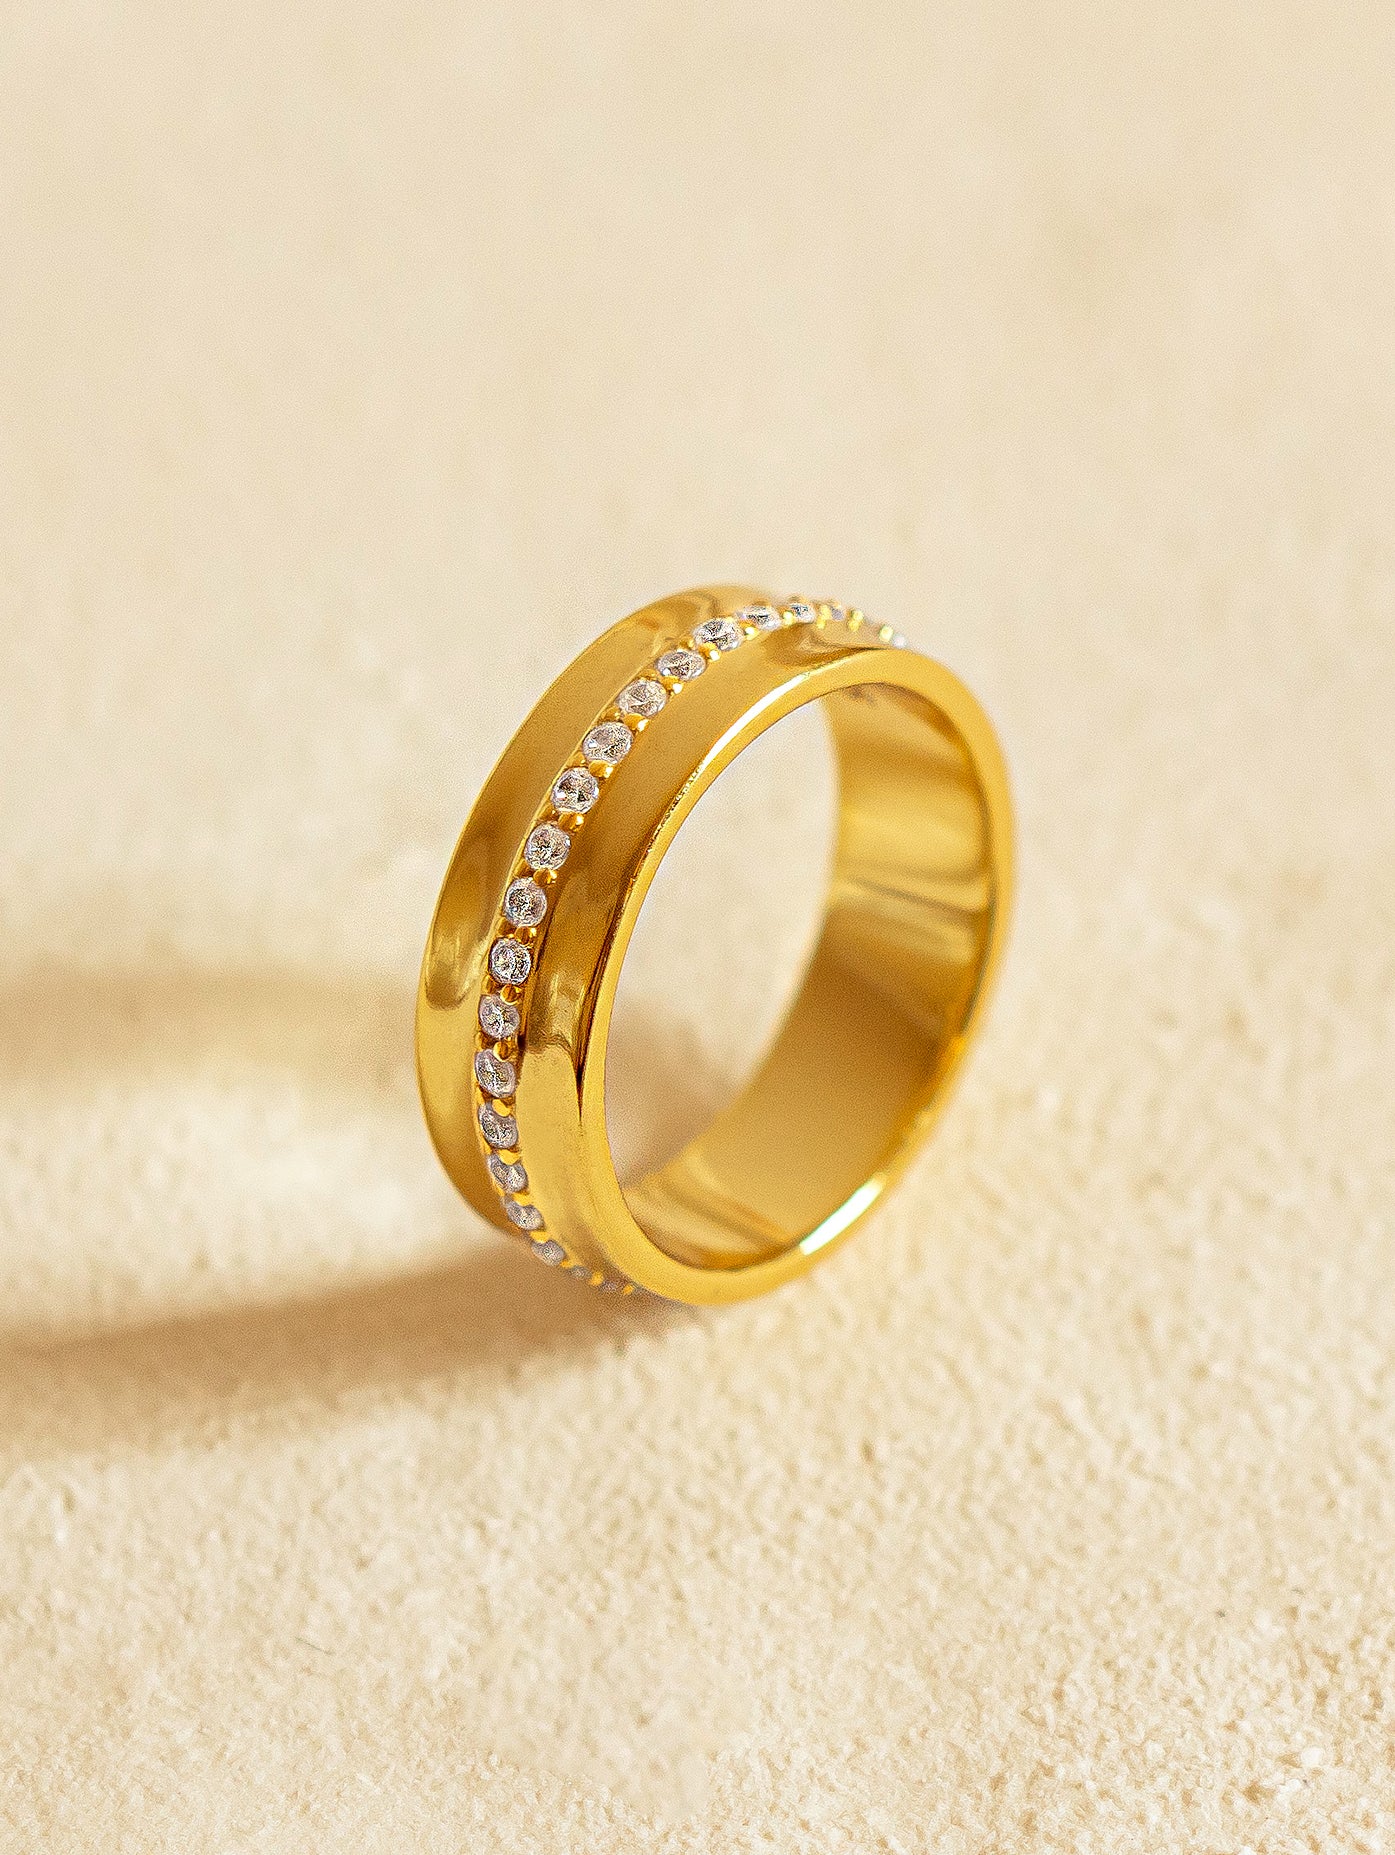 Gold Thick Ring Band With Stones